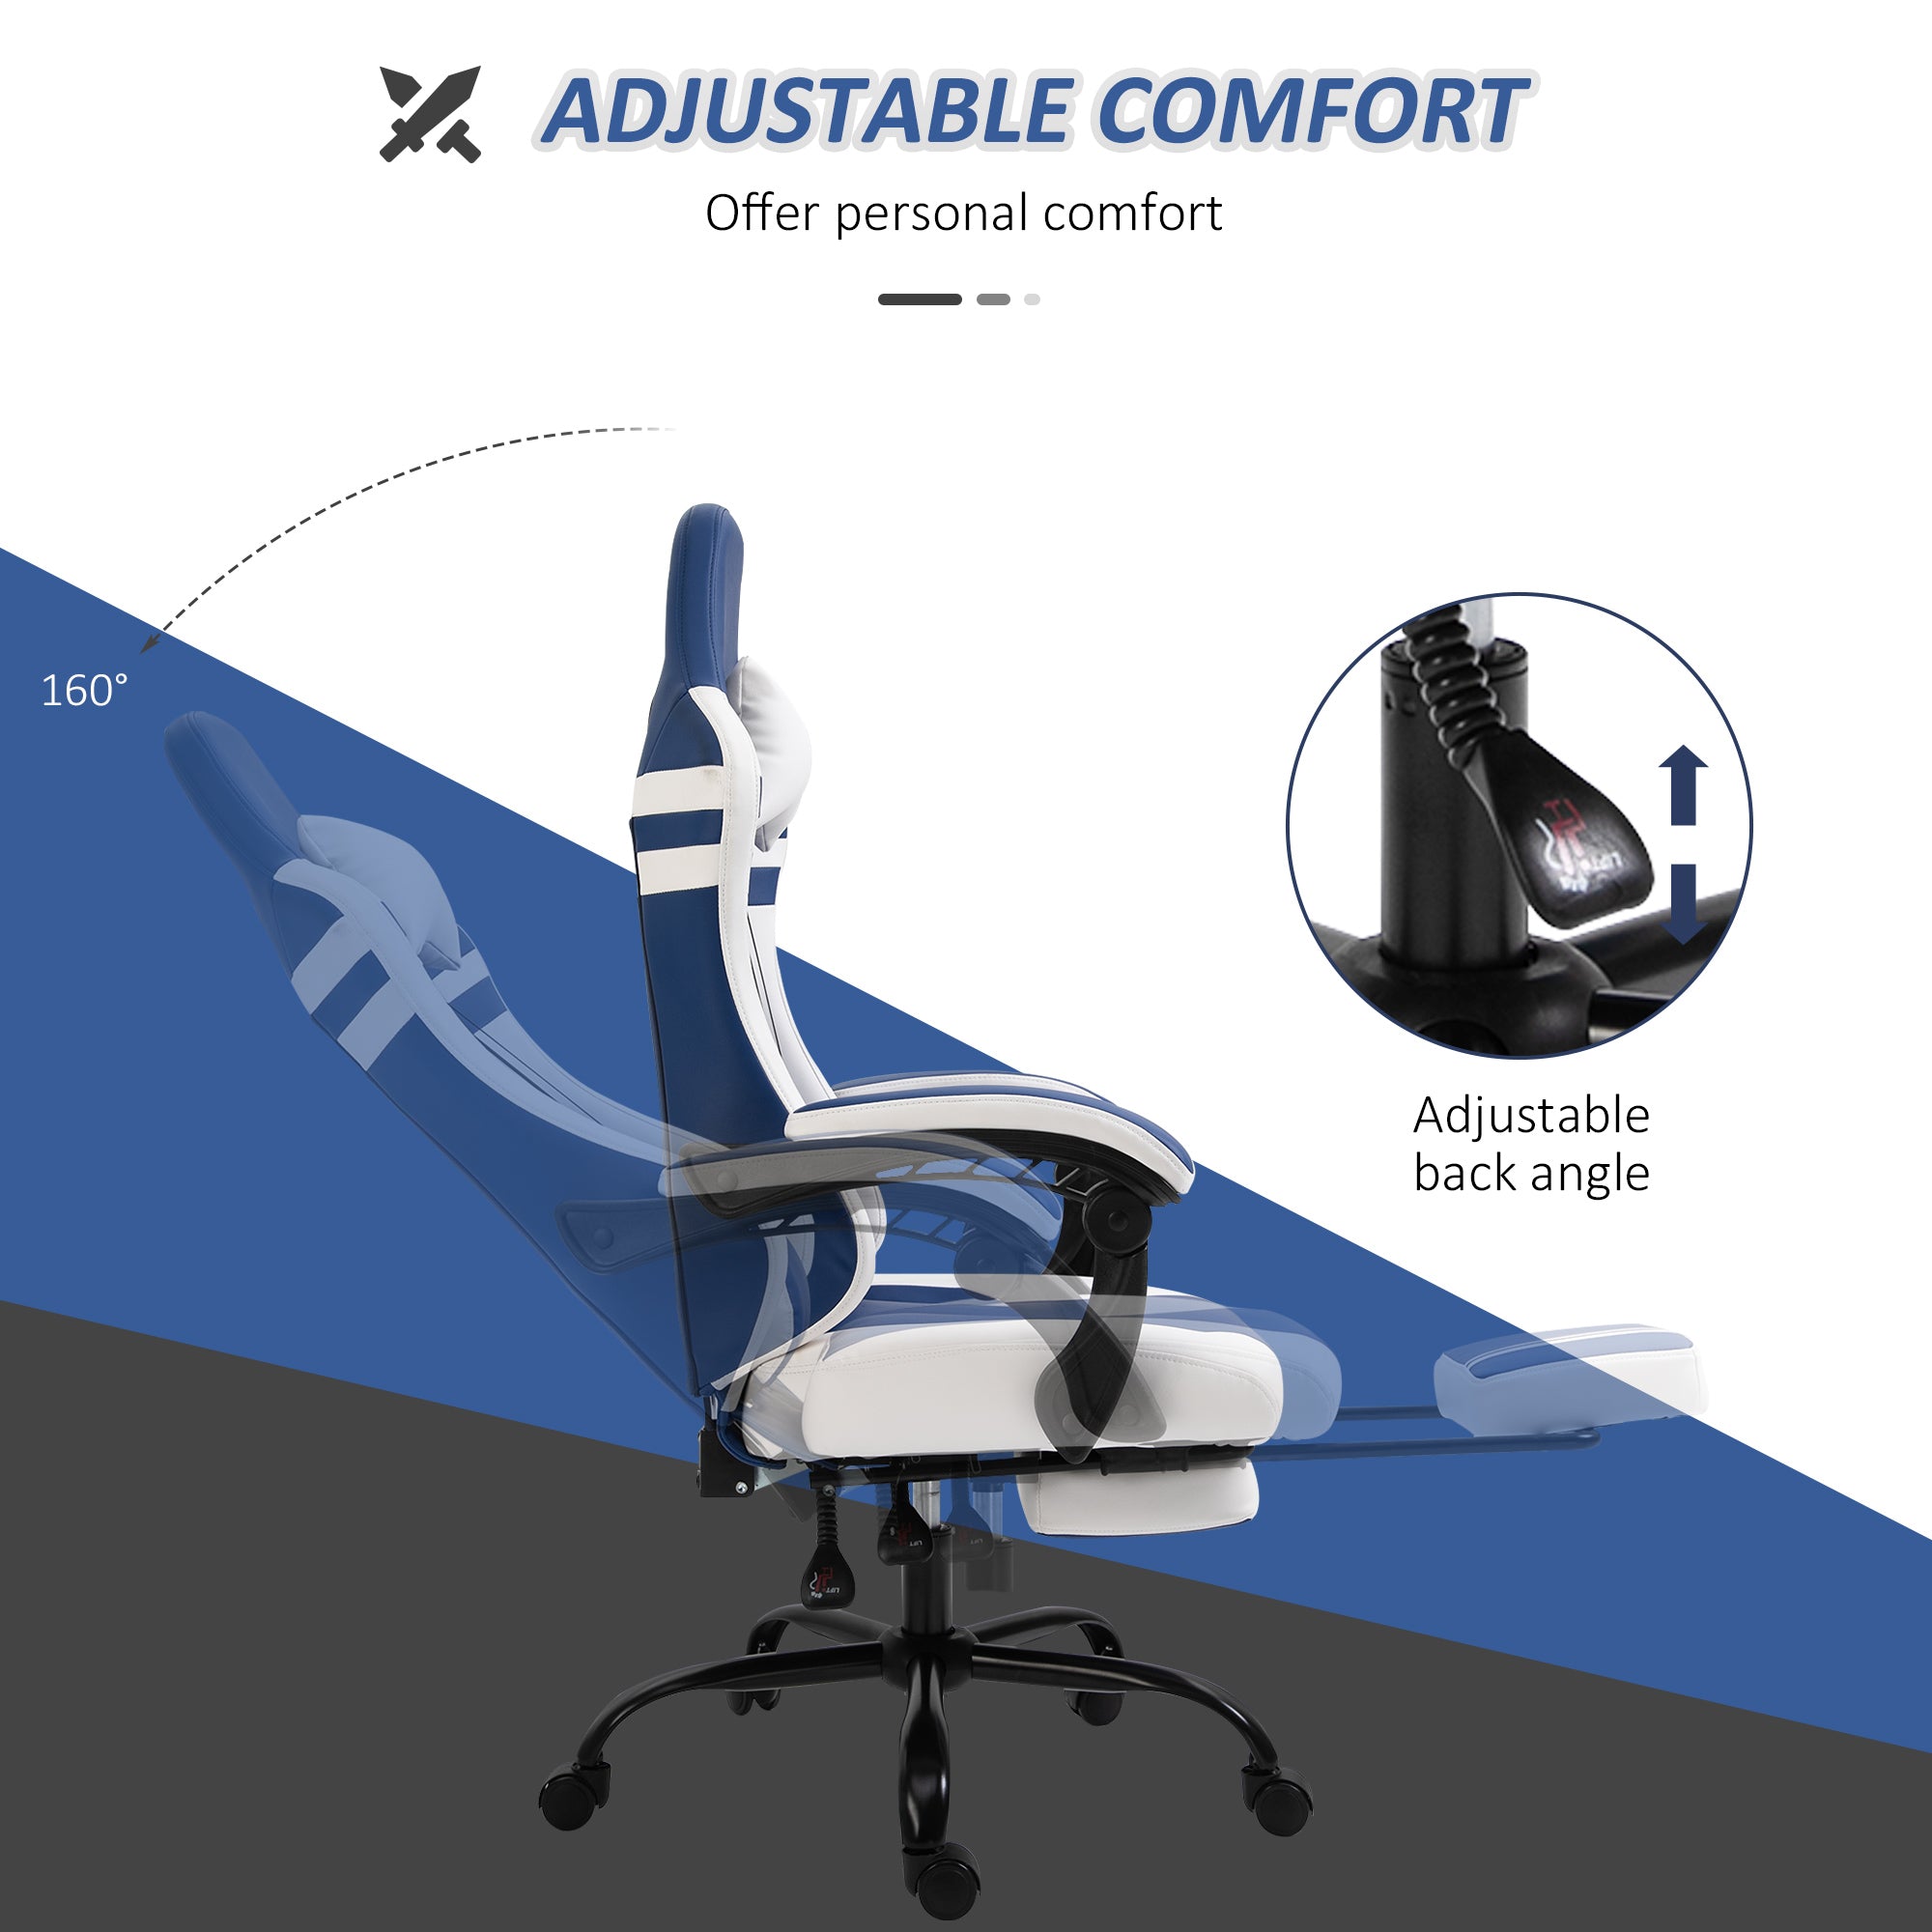 Vinsetto PU Leather Gaming Chair w/ Headrest, Footrest, Wheels, Adjustable Height, Racing Gamer Recliner, Blue White - Inspirely